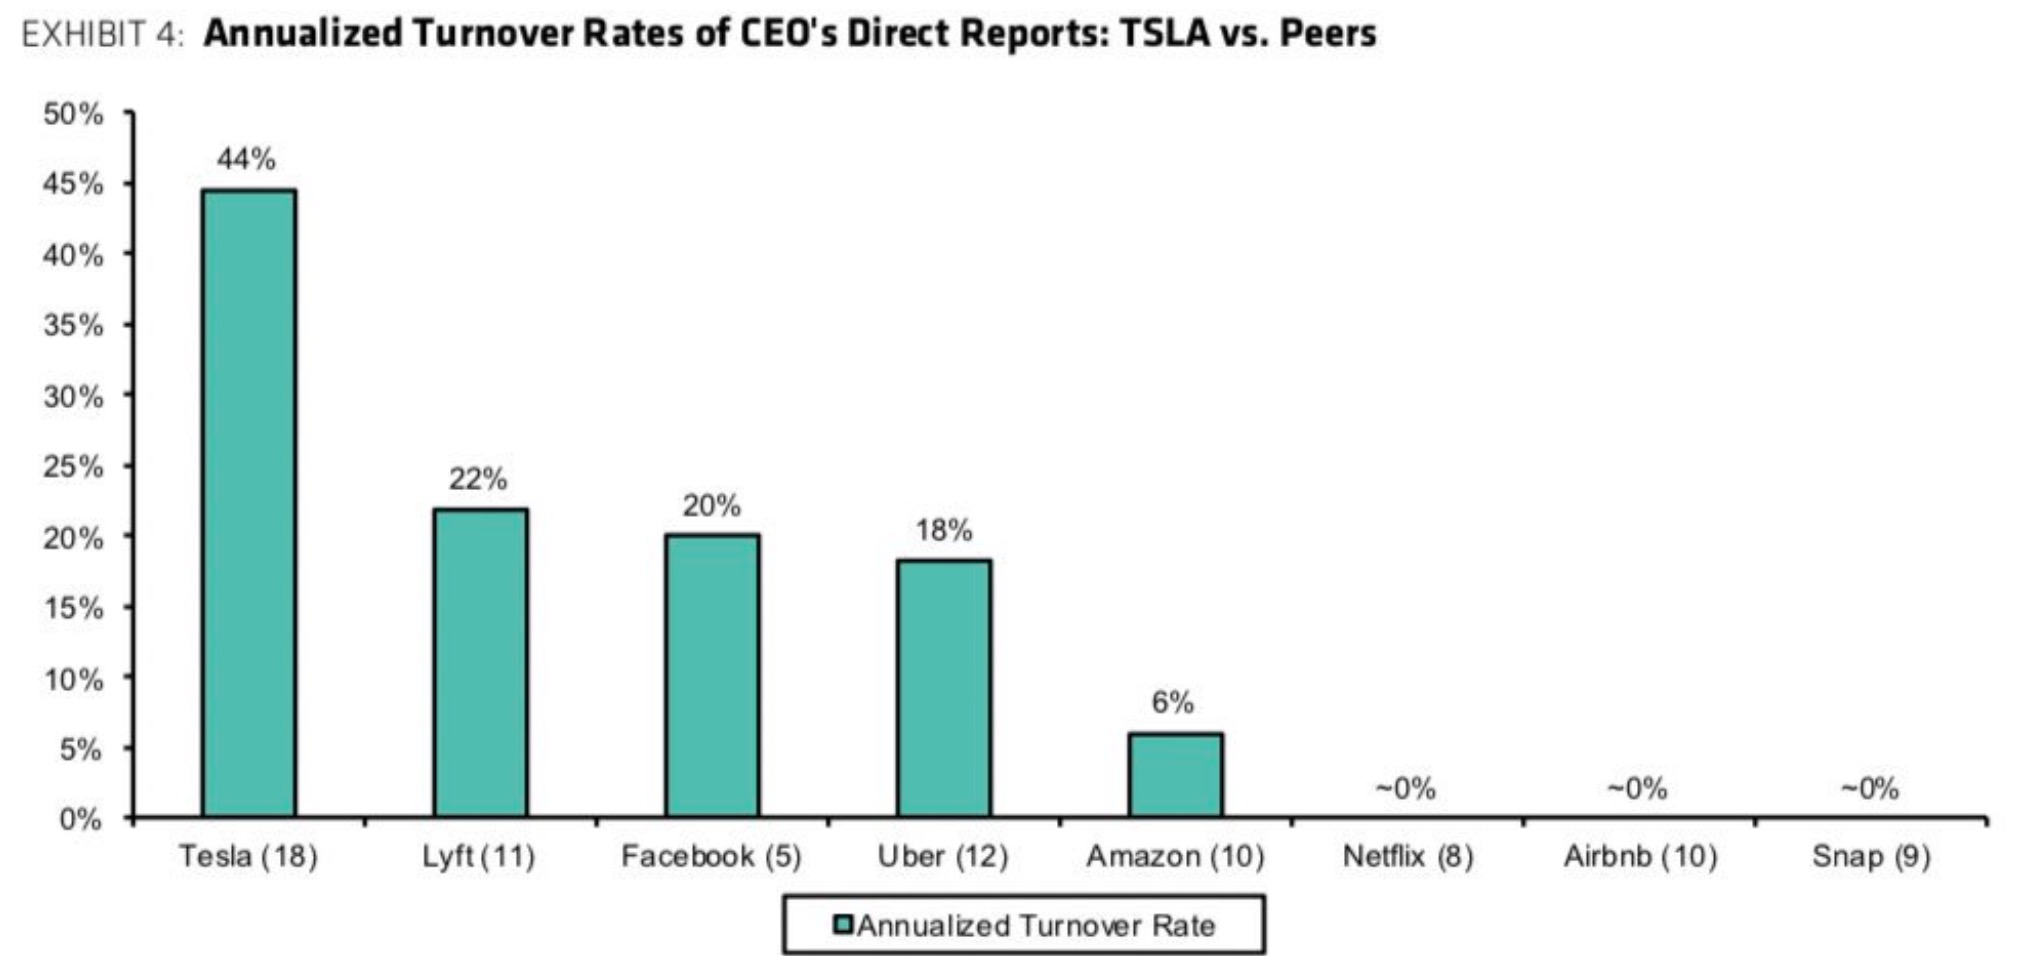 Tesla executives who report directly to Elon Musk have much higher